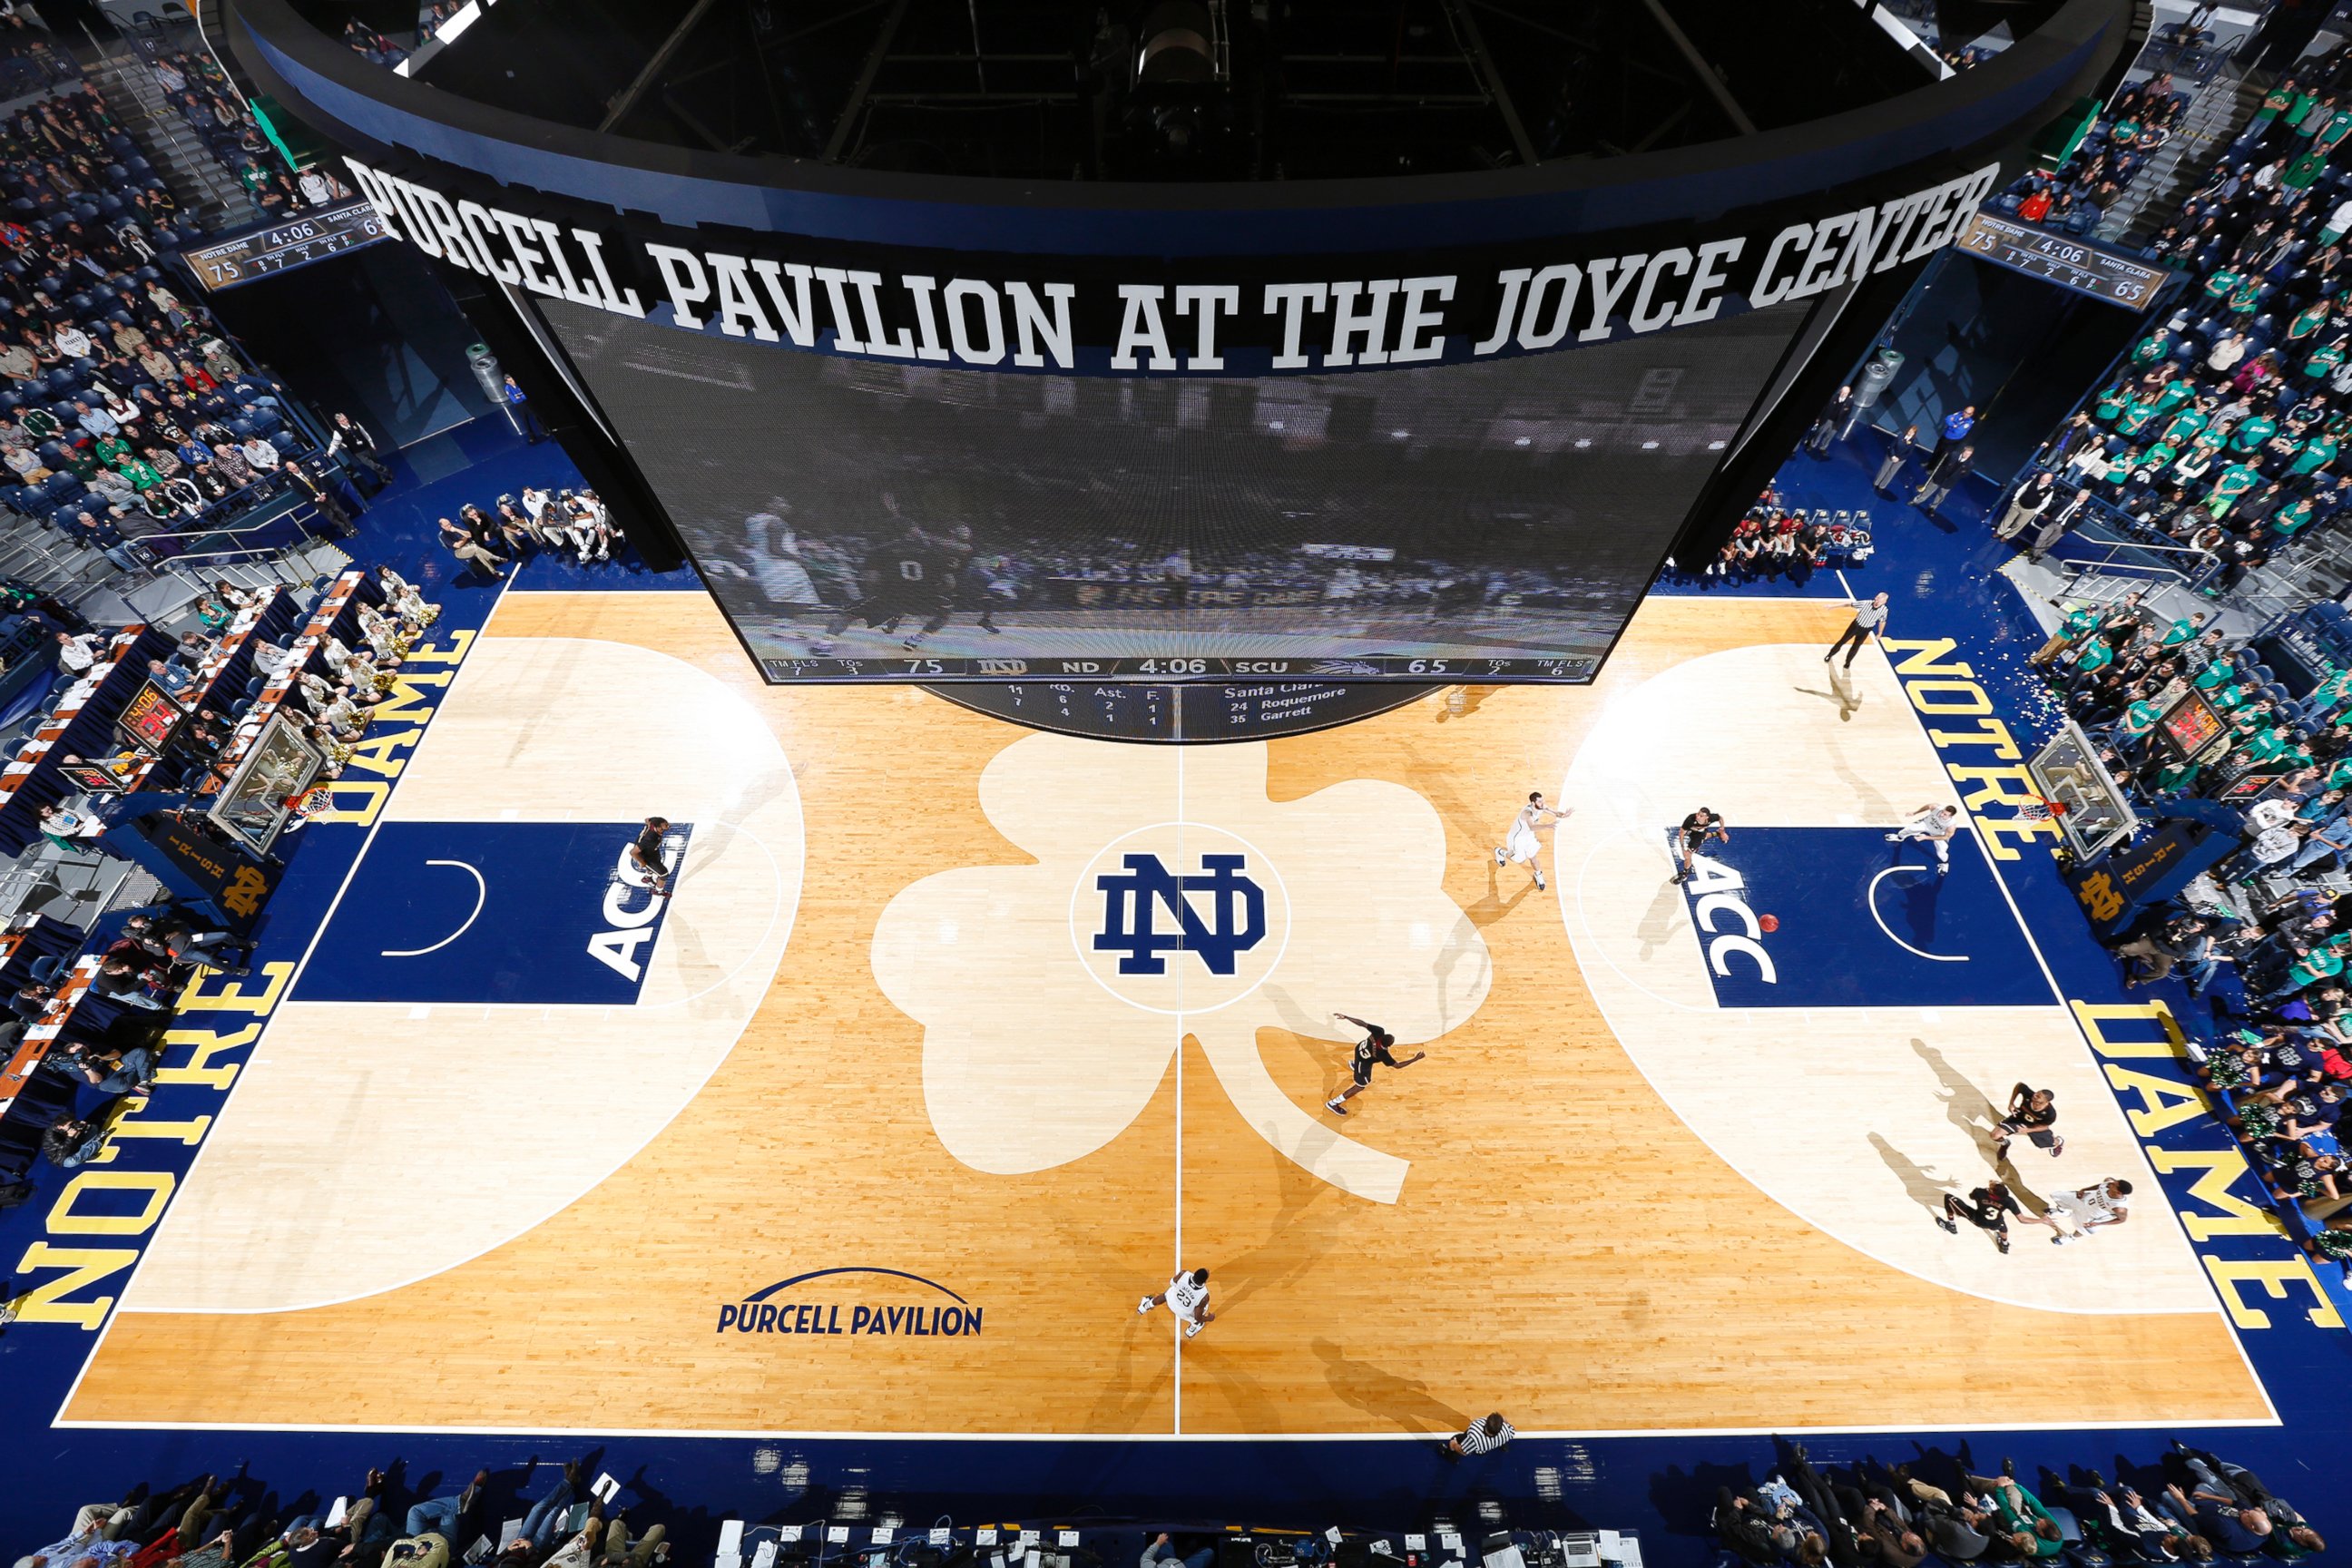 PHOTO: General view of the arena as the Notre Dame Fighting Irish play against the Santa Clara Broncos during the game at Purcell Pavilion at the Joyce Center on Nov. 22, 2013 in South Bend, Ind. 